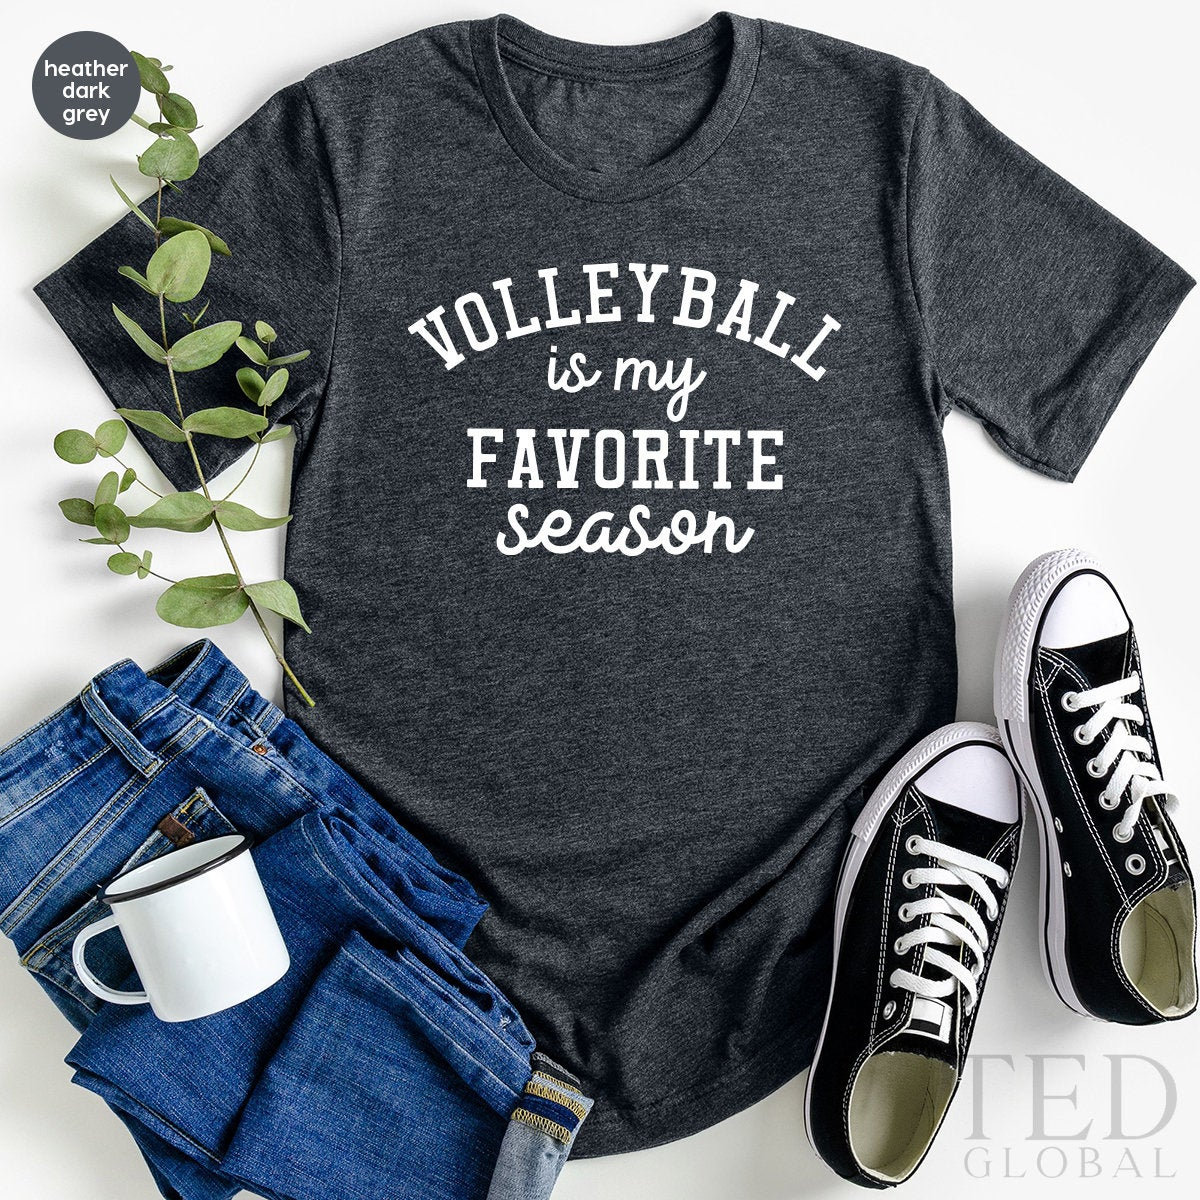 Super Soft T-Shirt for Volleyball Players 